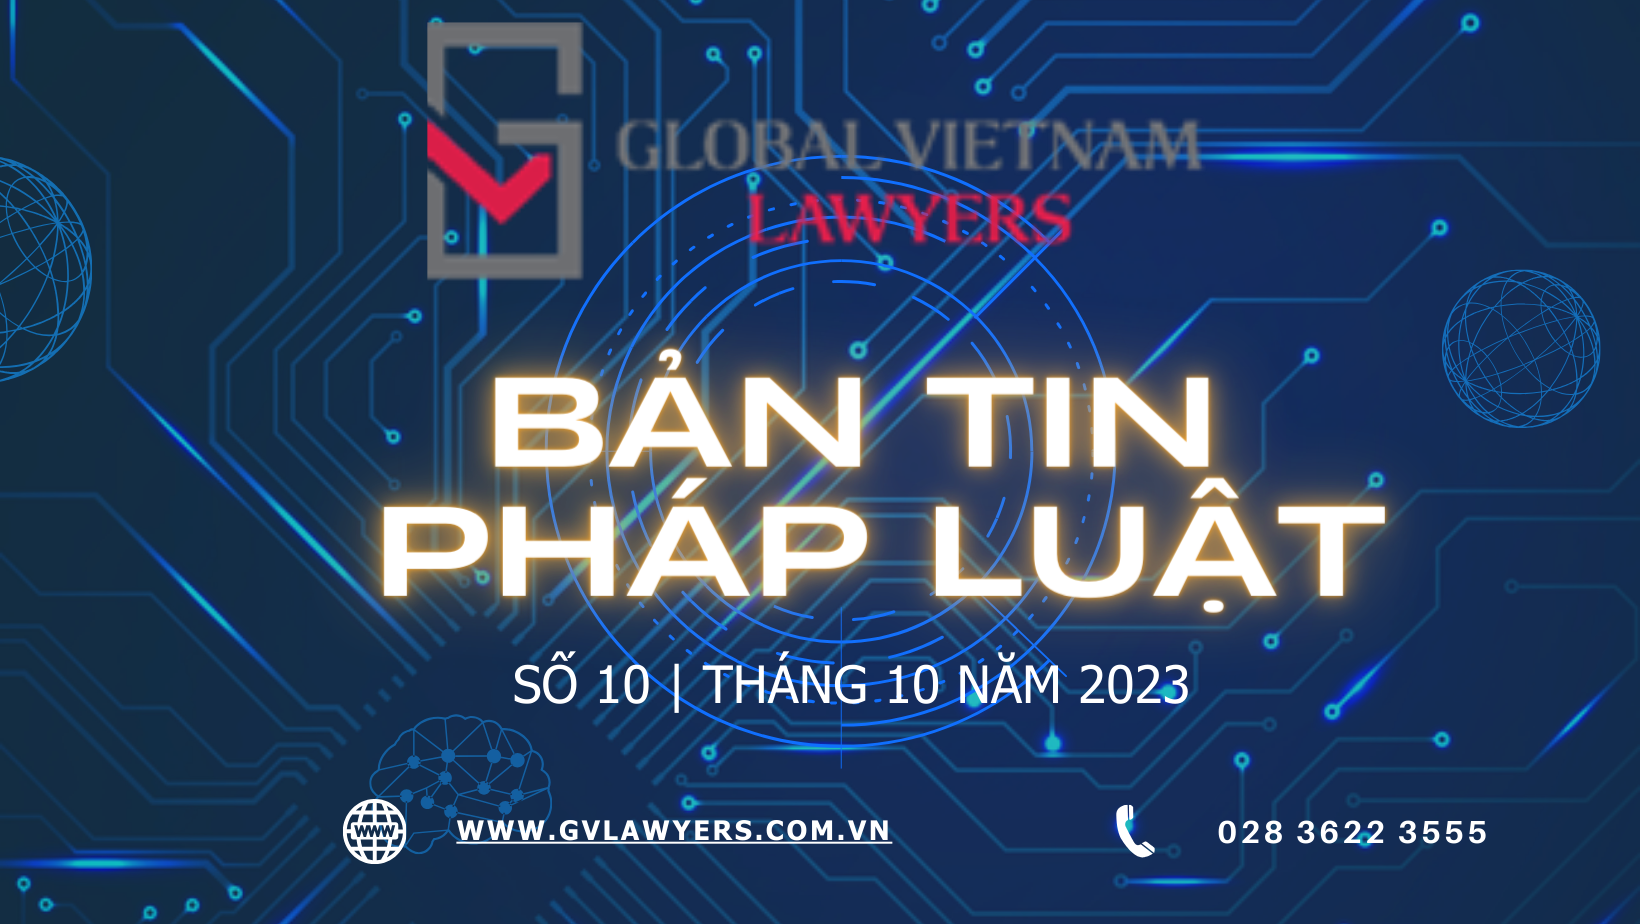 VN Legal Newsletter No. 10.2023 Cover